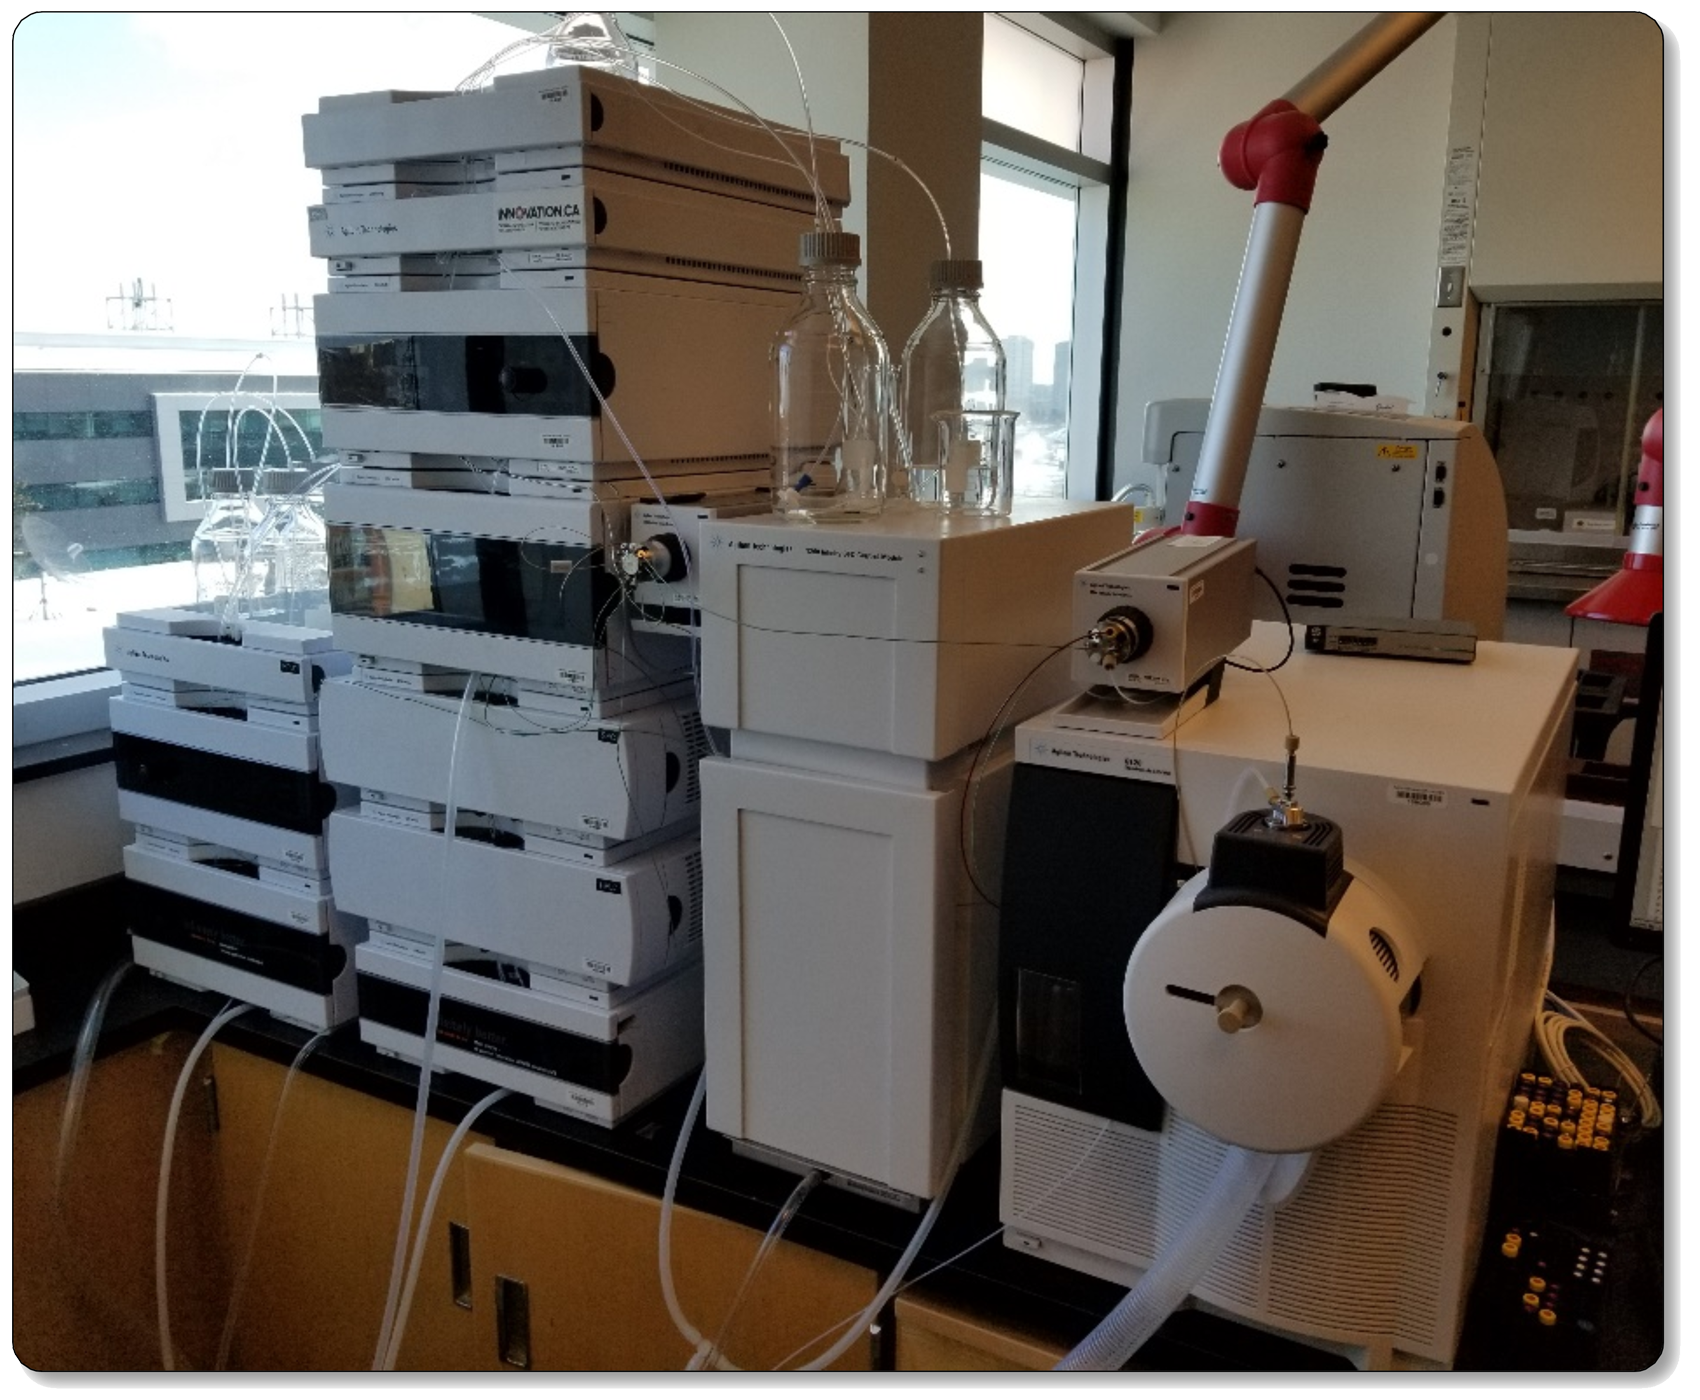 HPLC/SFC-MS analytical instrument